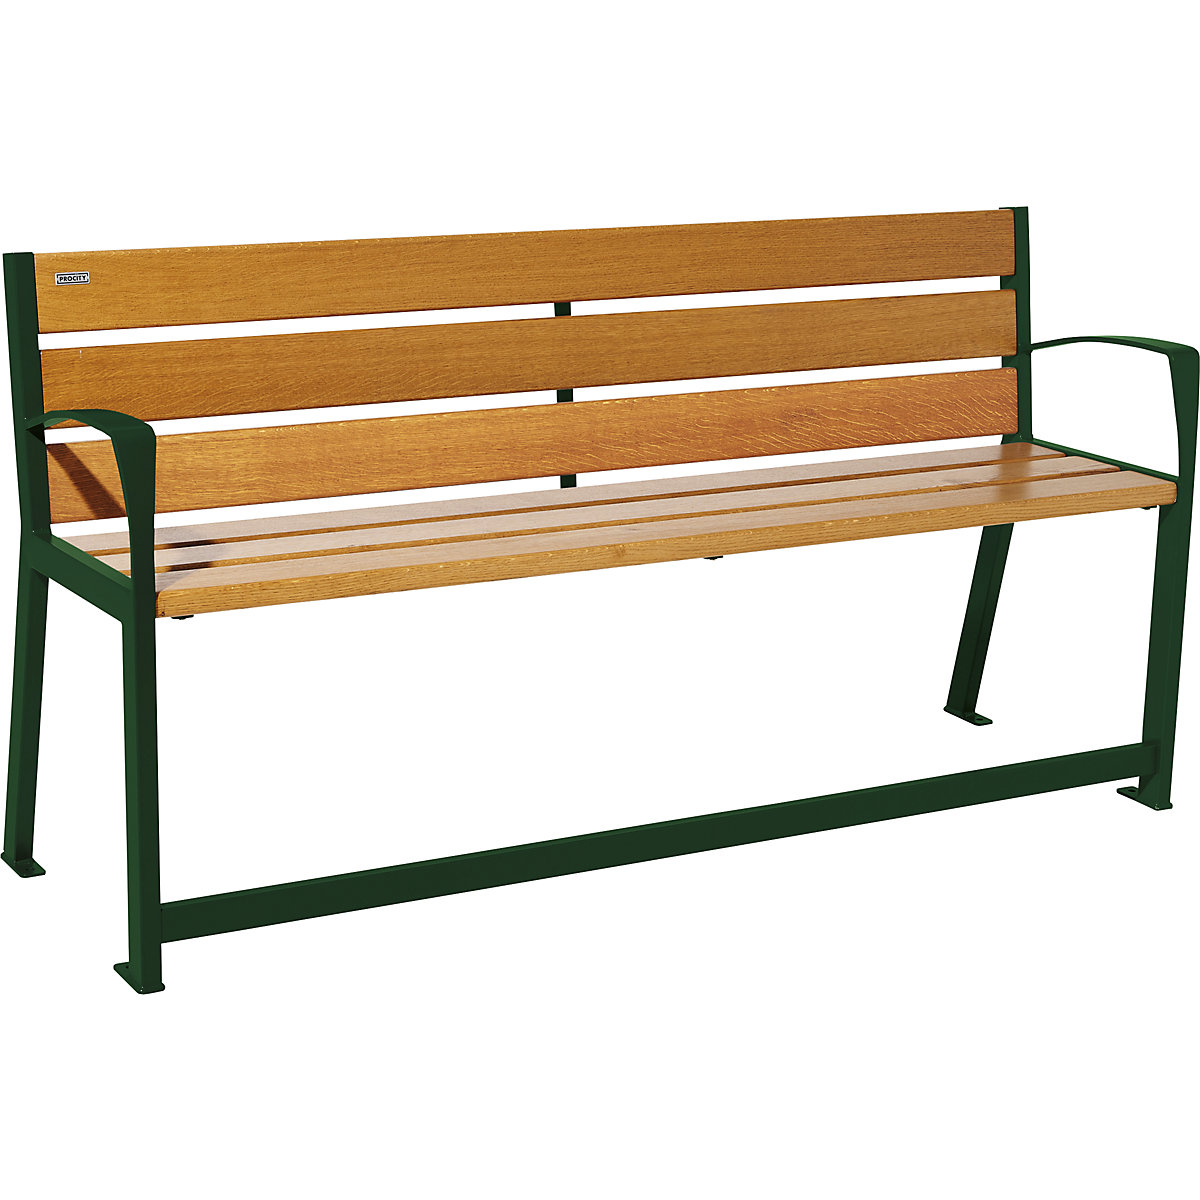 SILAOS® bench made of wood – PROCITY, with back rest, for seniors, length 1800 mm, moss green, light oak finish-4